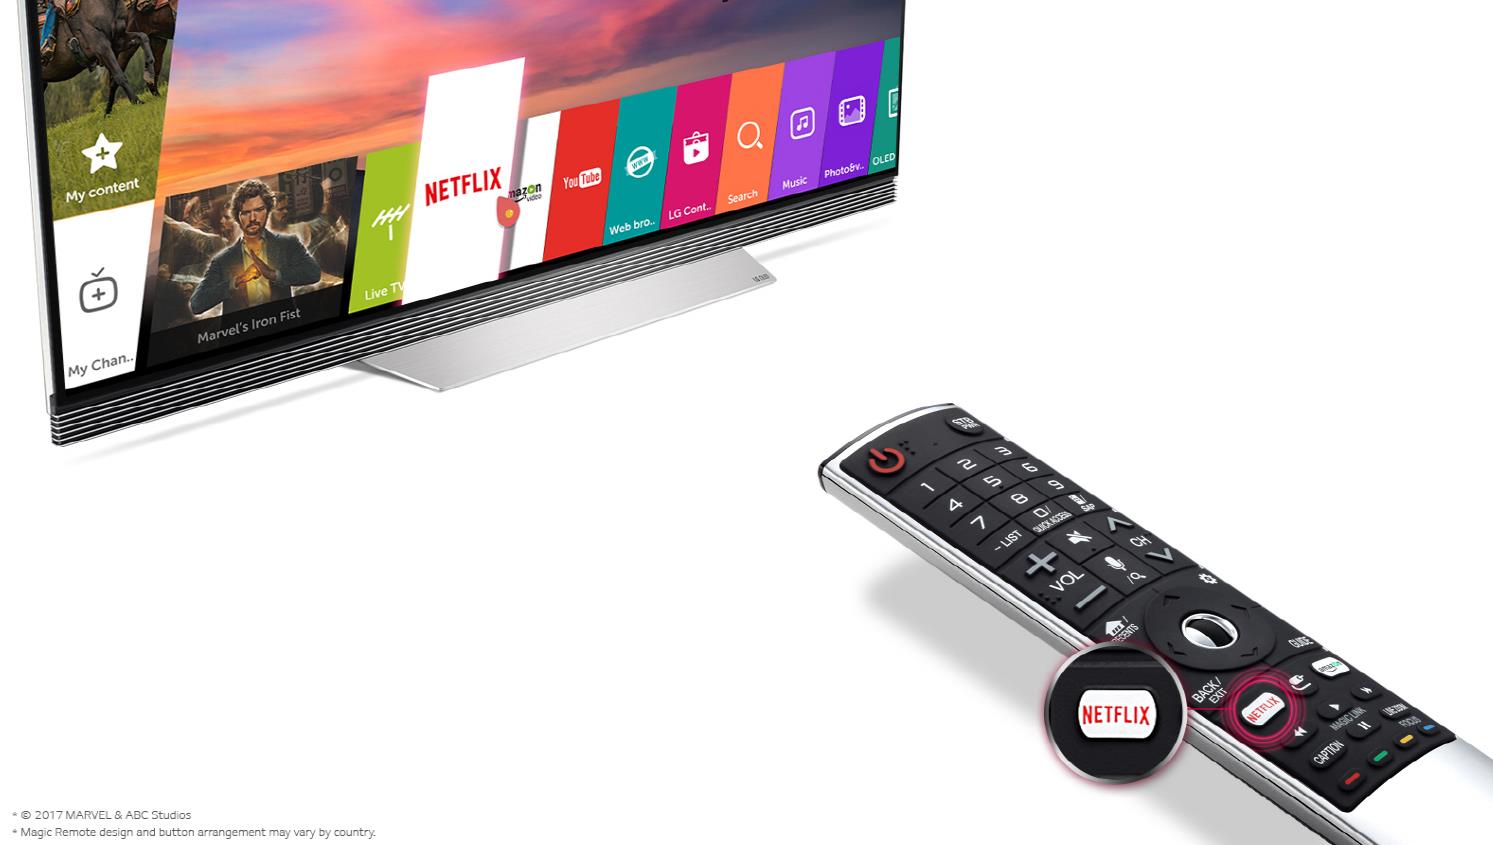 Free 3 months of Netflix with purchase of LG 4K UHD TV 11